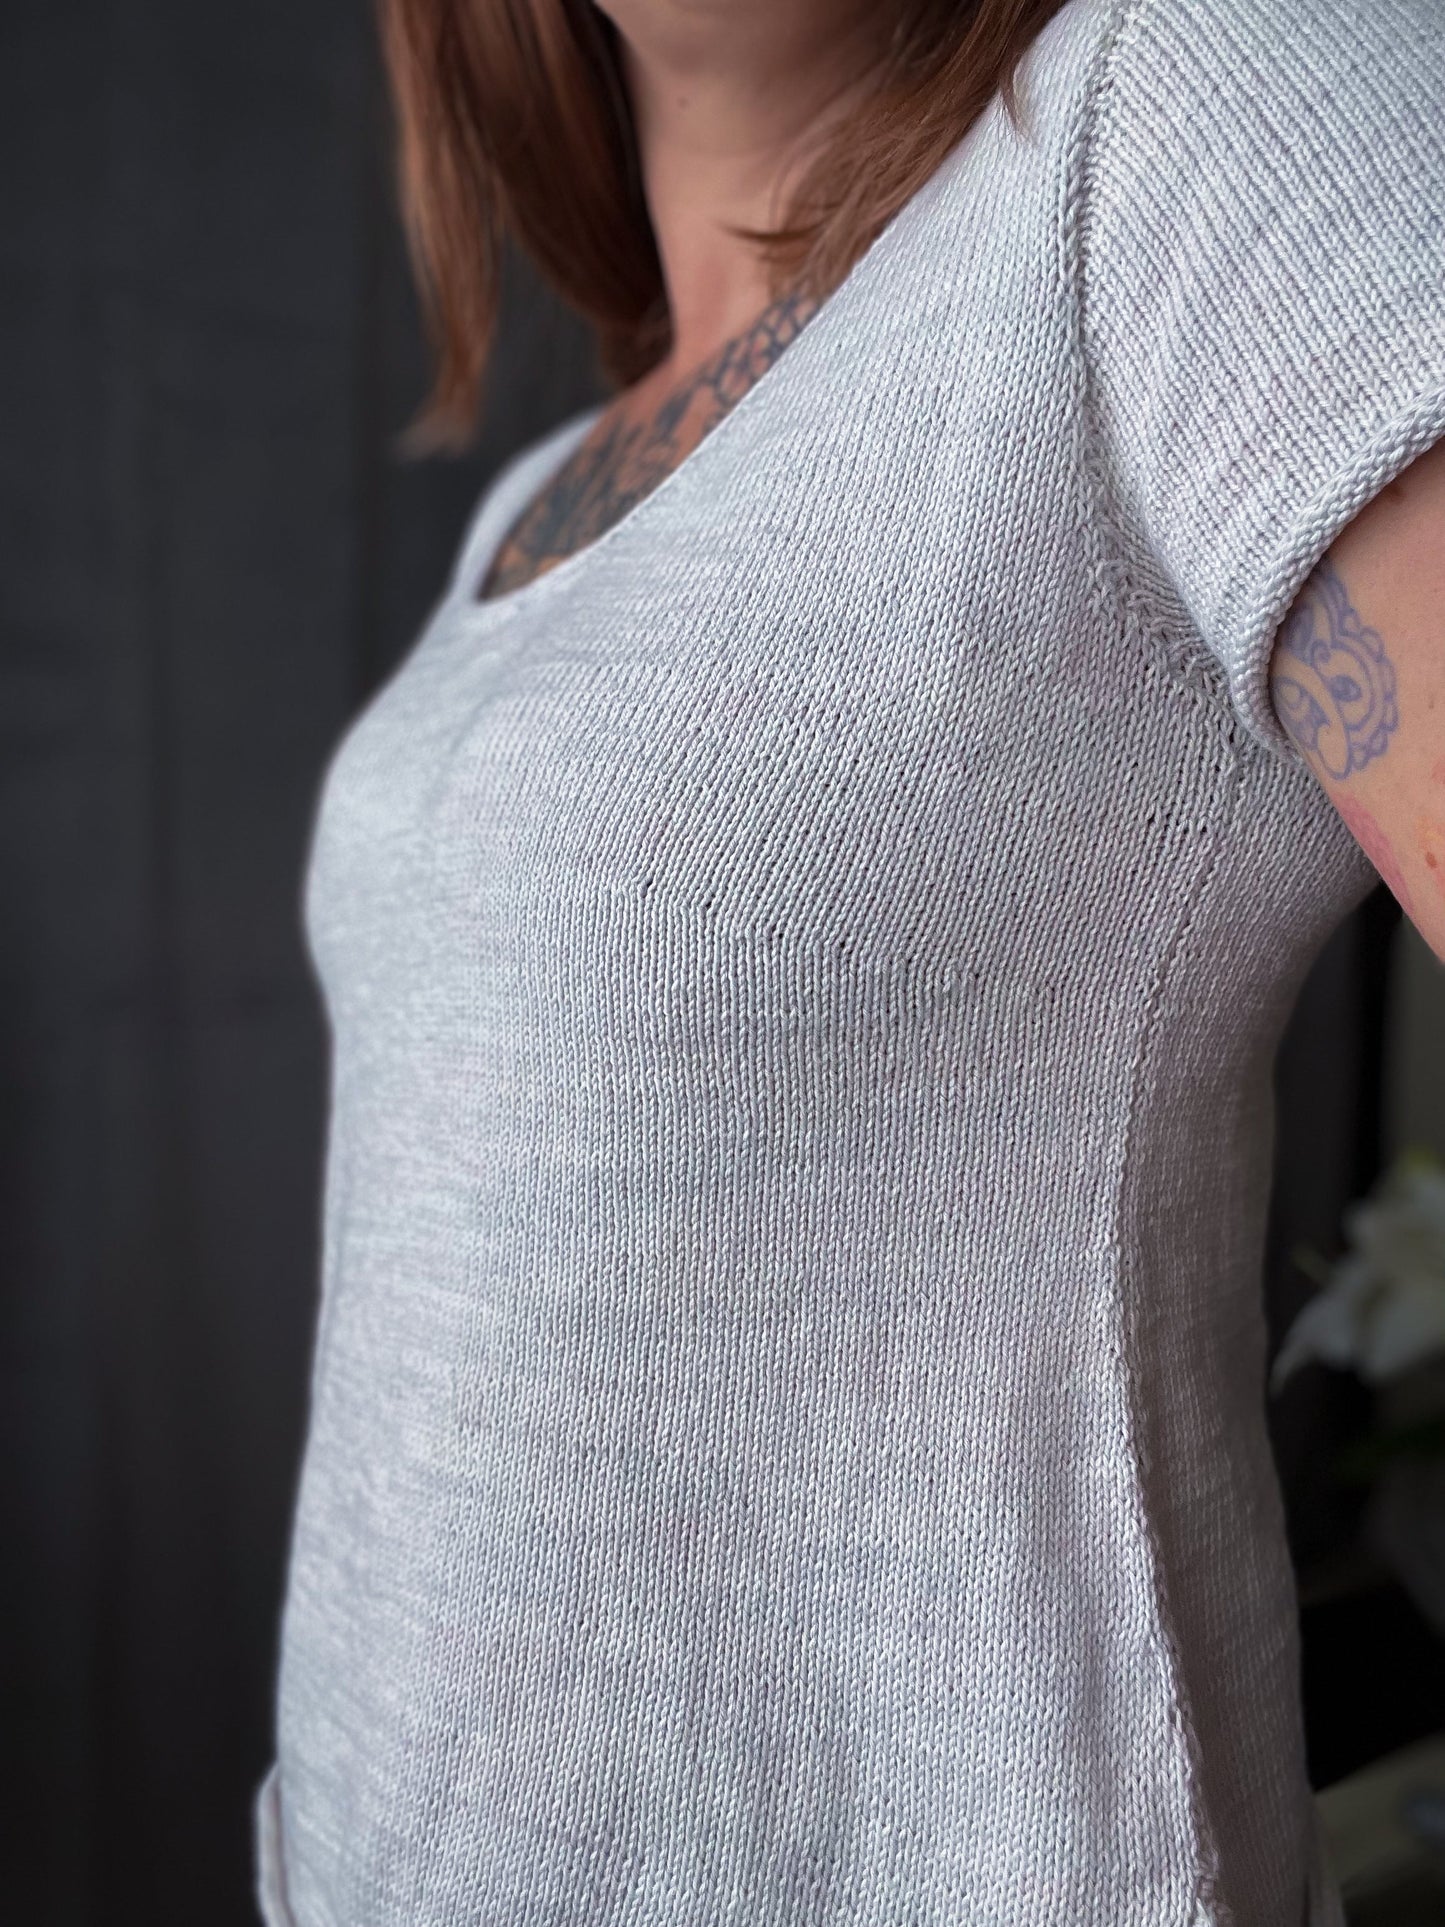 Seen from the side and from the shoulders down, Bess wears a white tee knit in a simple stockinette stitch.